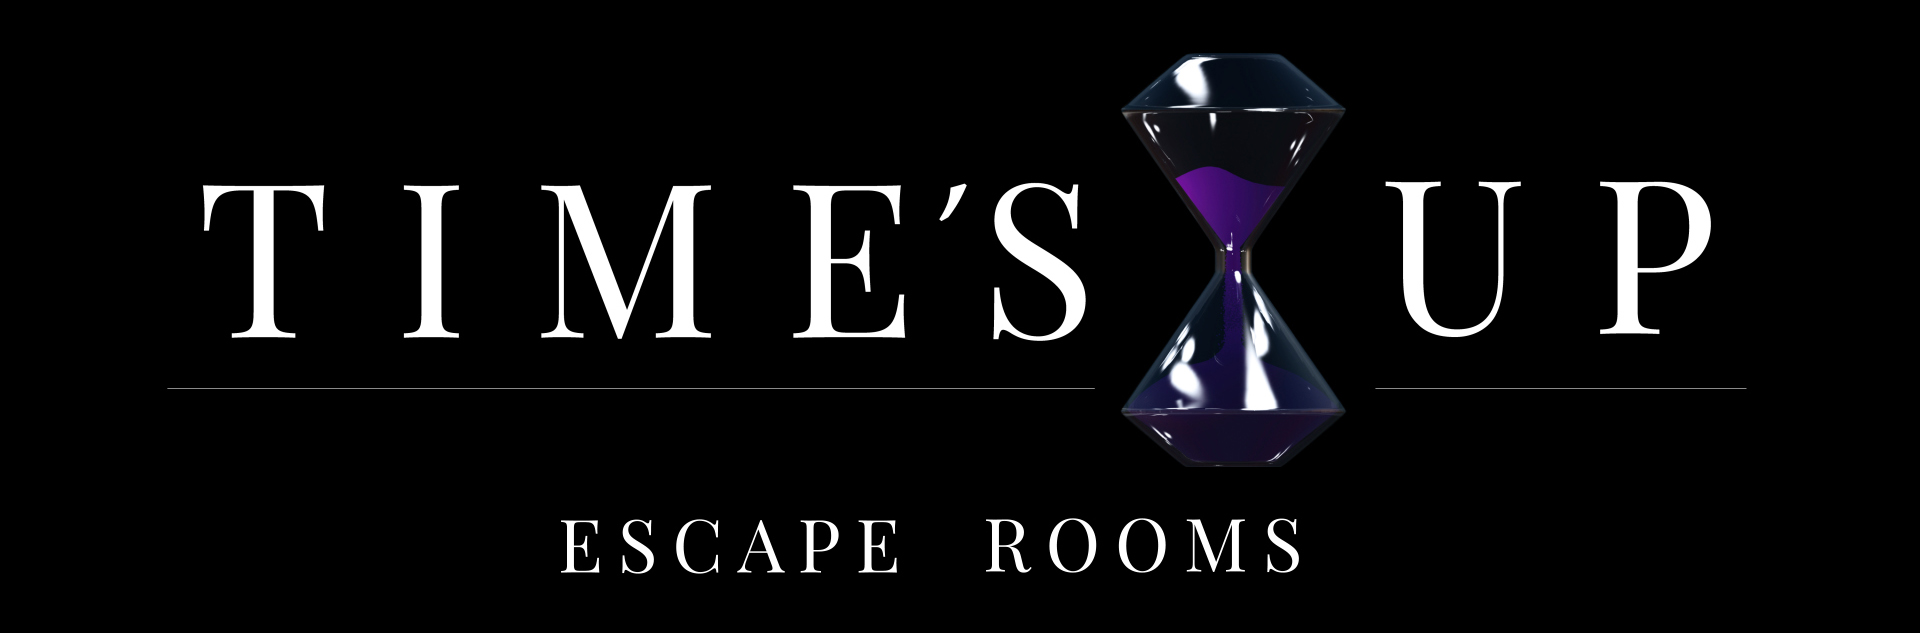 Time's Up Escape Room